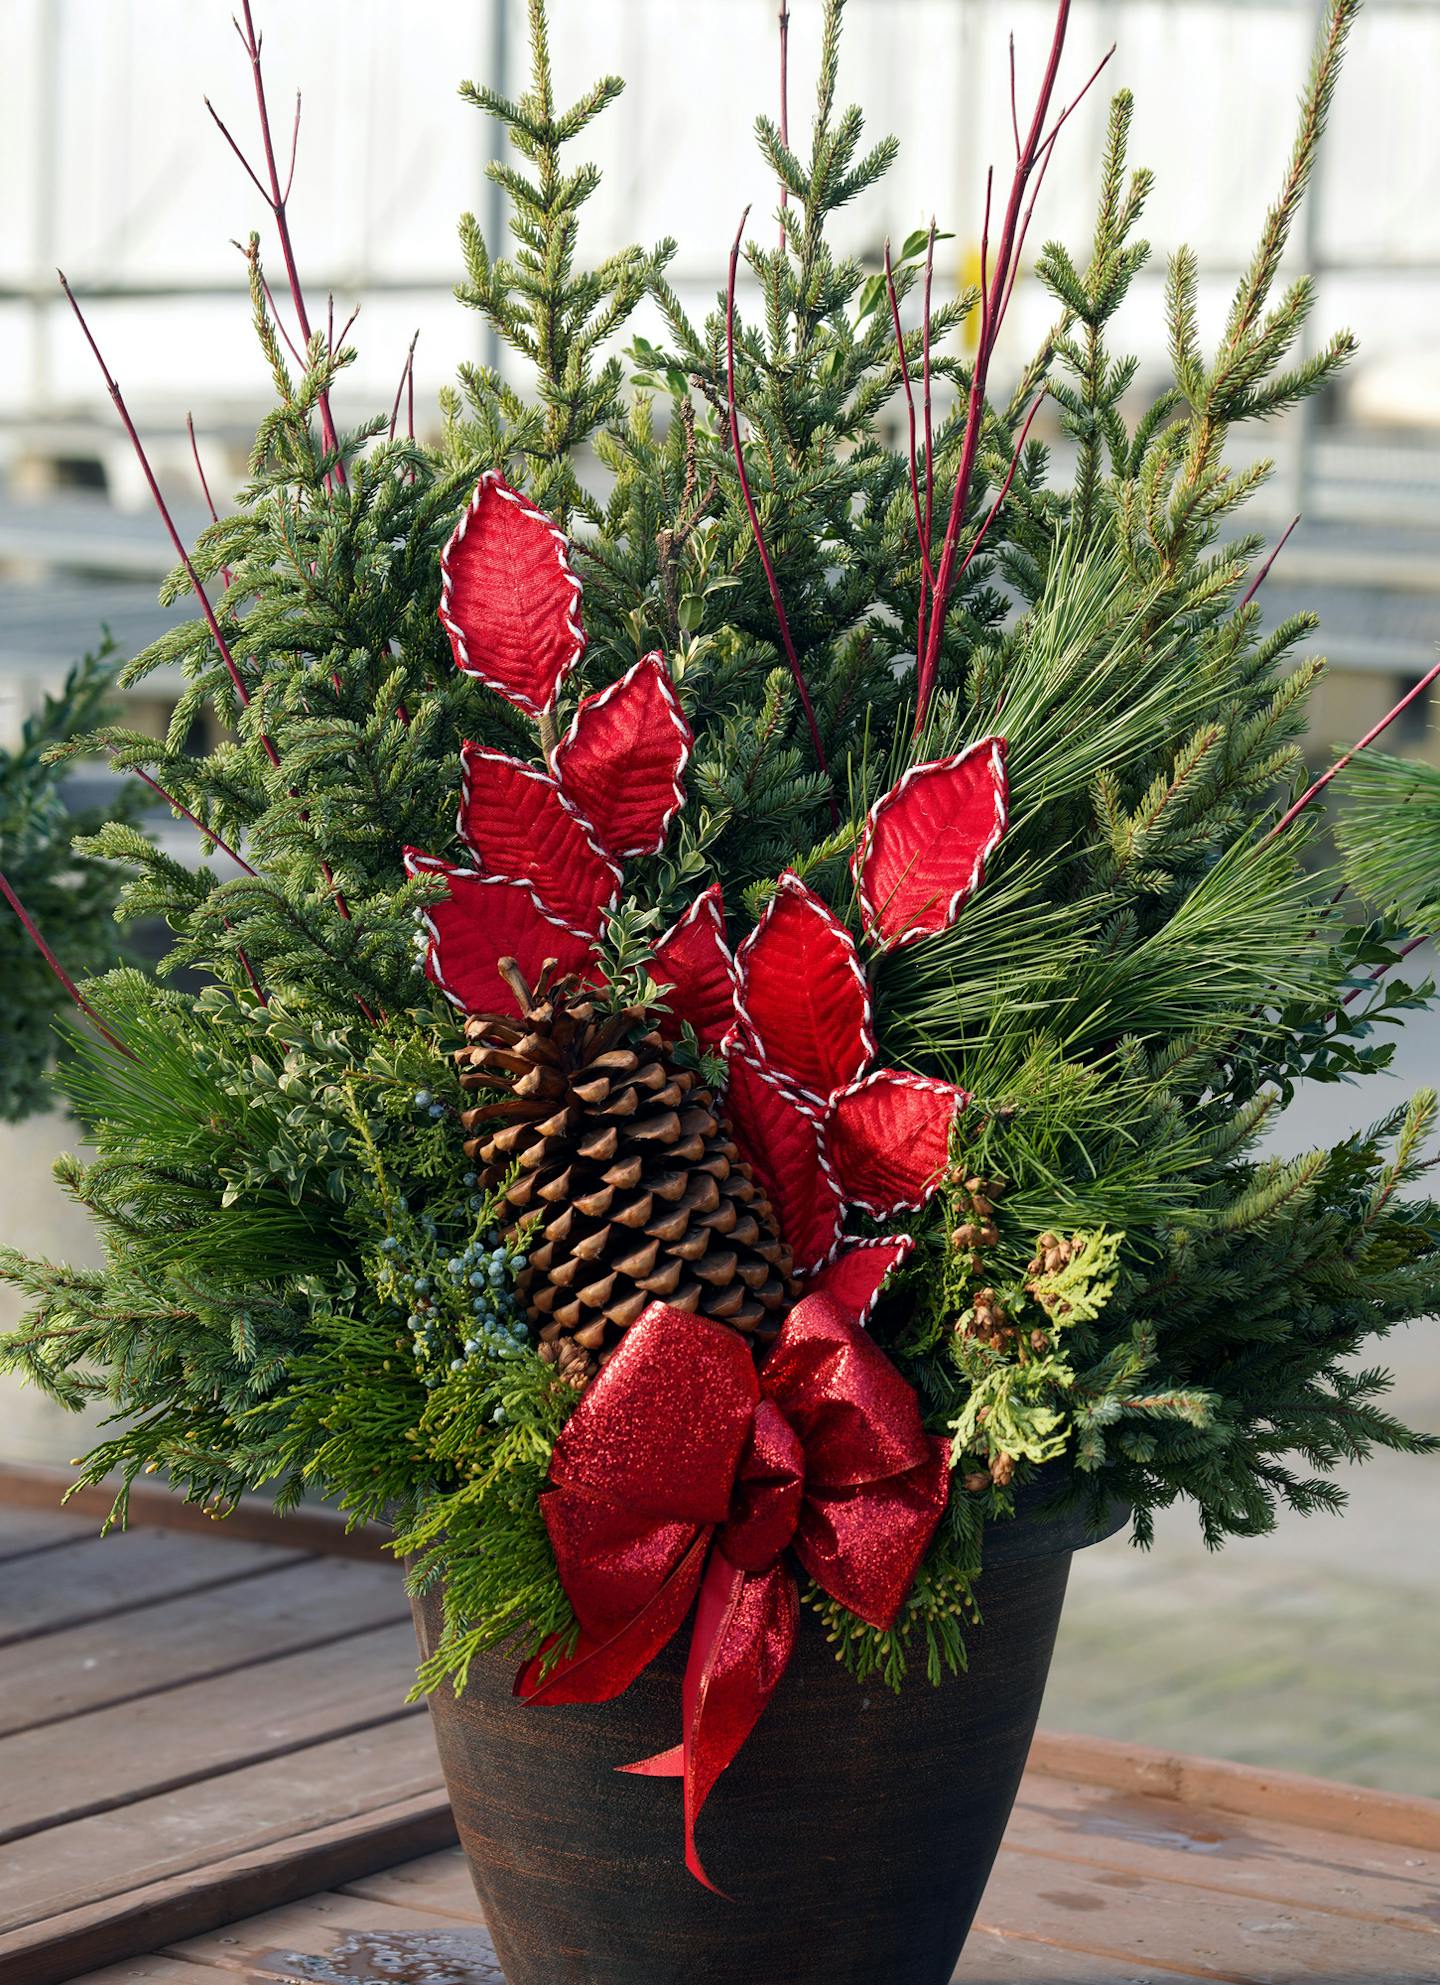 CHRISTMAS FLORAL DISPLAY - Pahl's Market - Apple Valley, MN